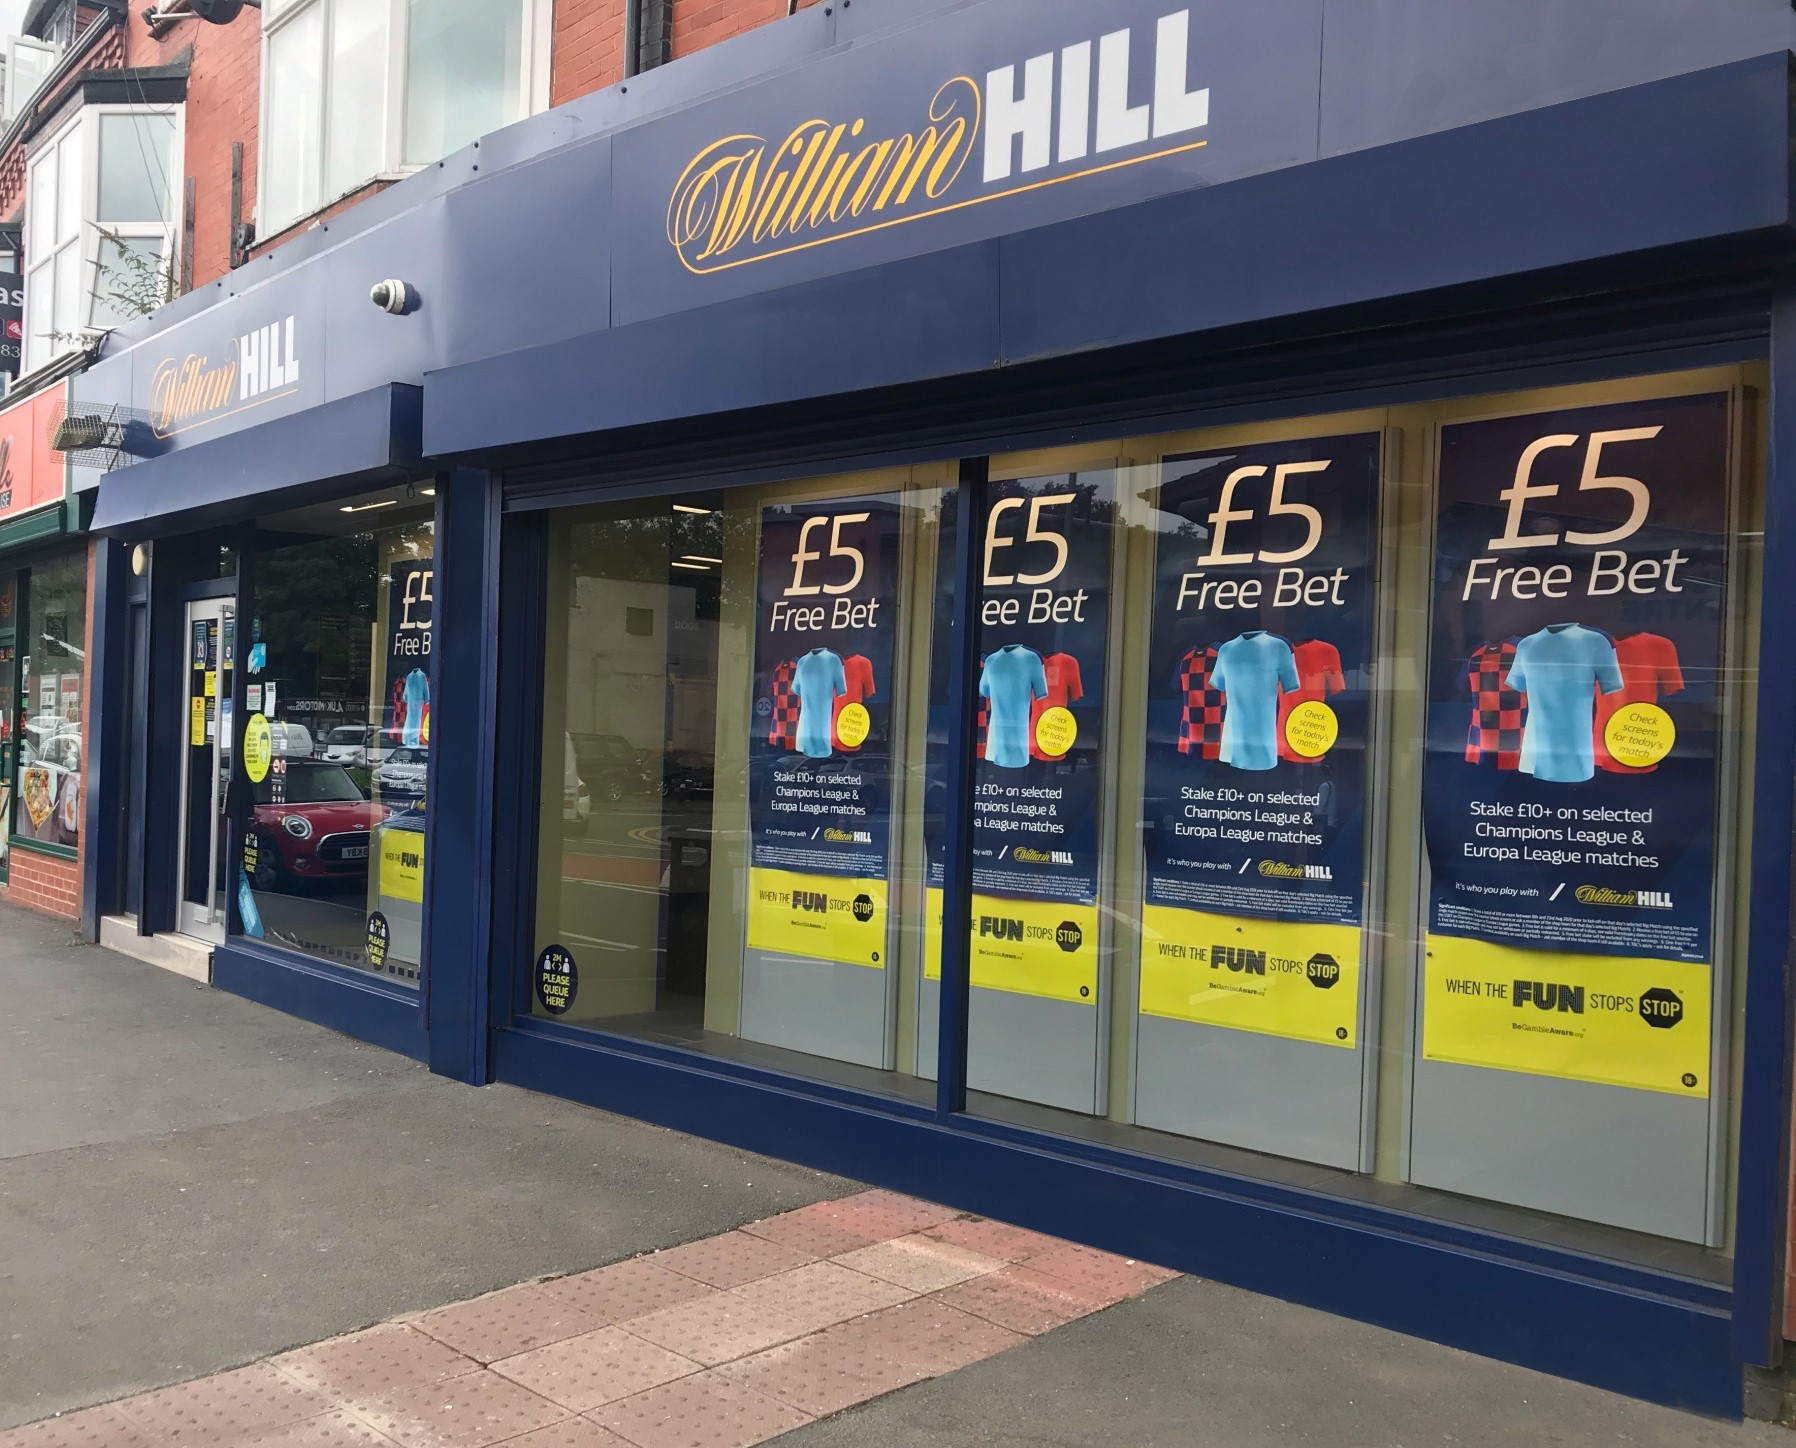 William Hill will pay a record £19 million fine for its lack of social responsibility.